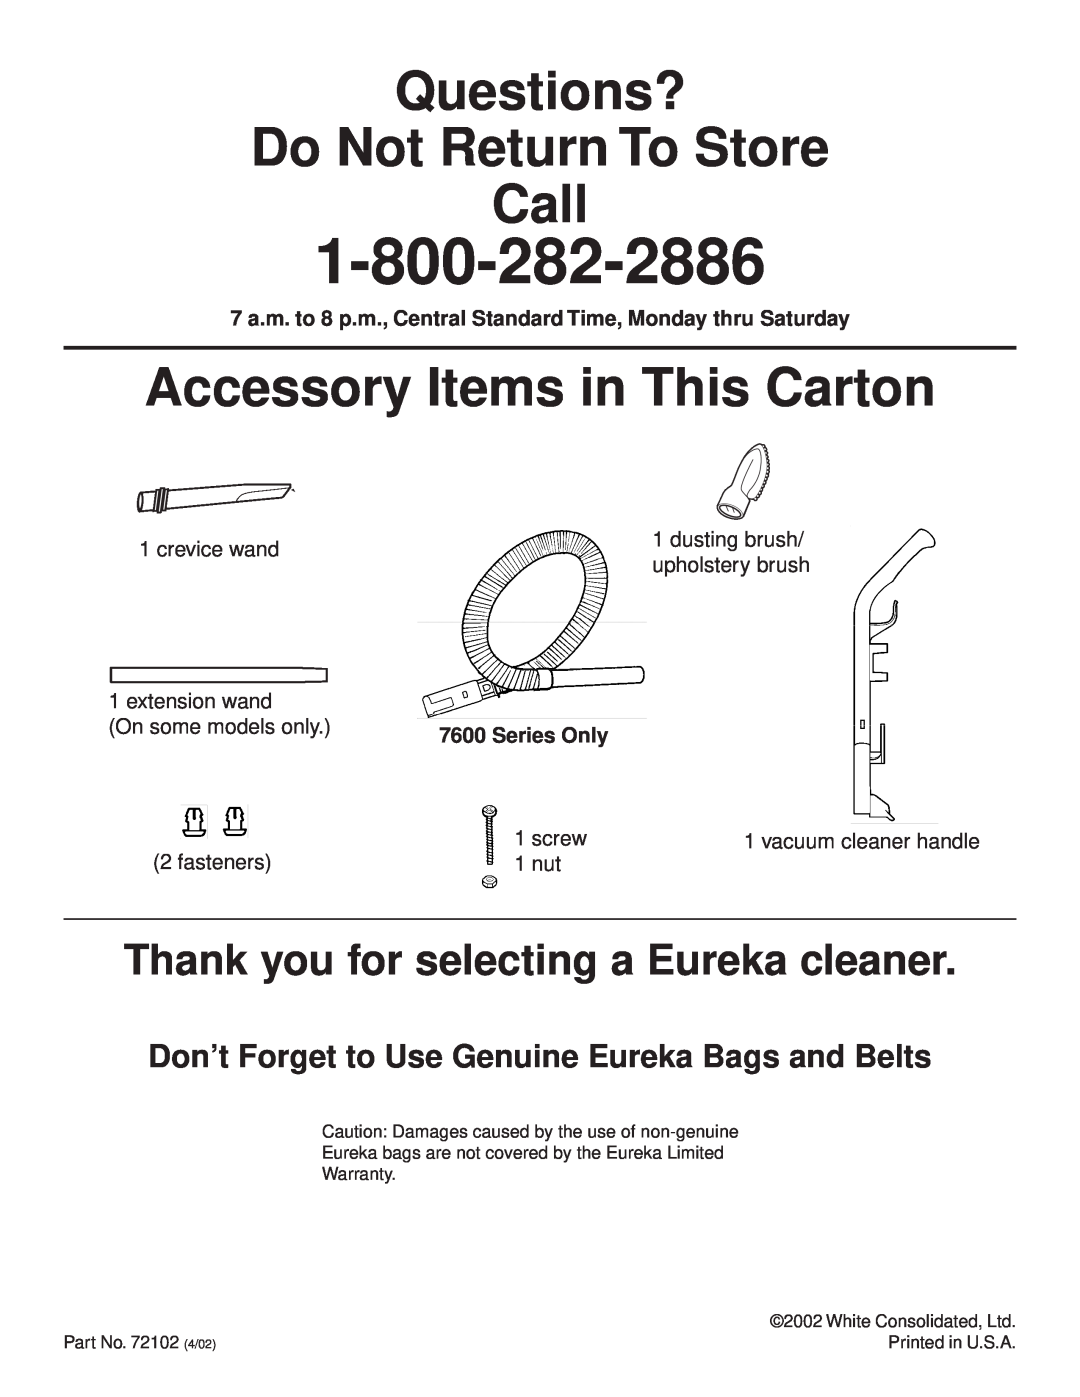 Eureka 7600 Questions? Do Not Return To Store Call, Accessory Items in This Carton, crevice wand, dusting brush, fasteners 